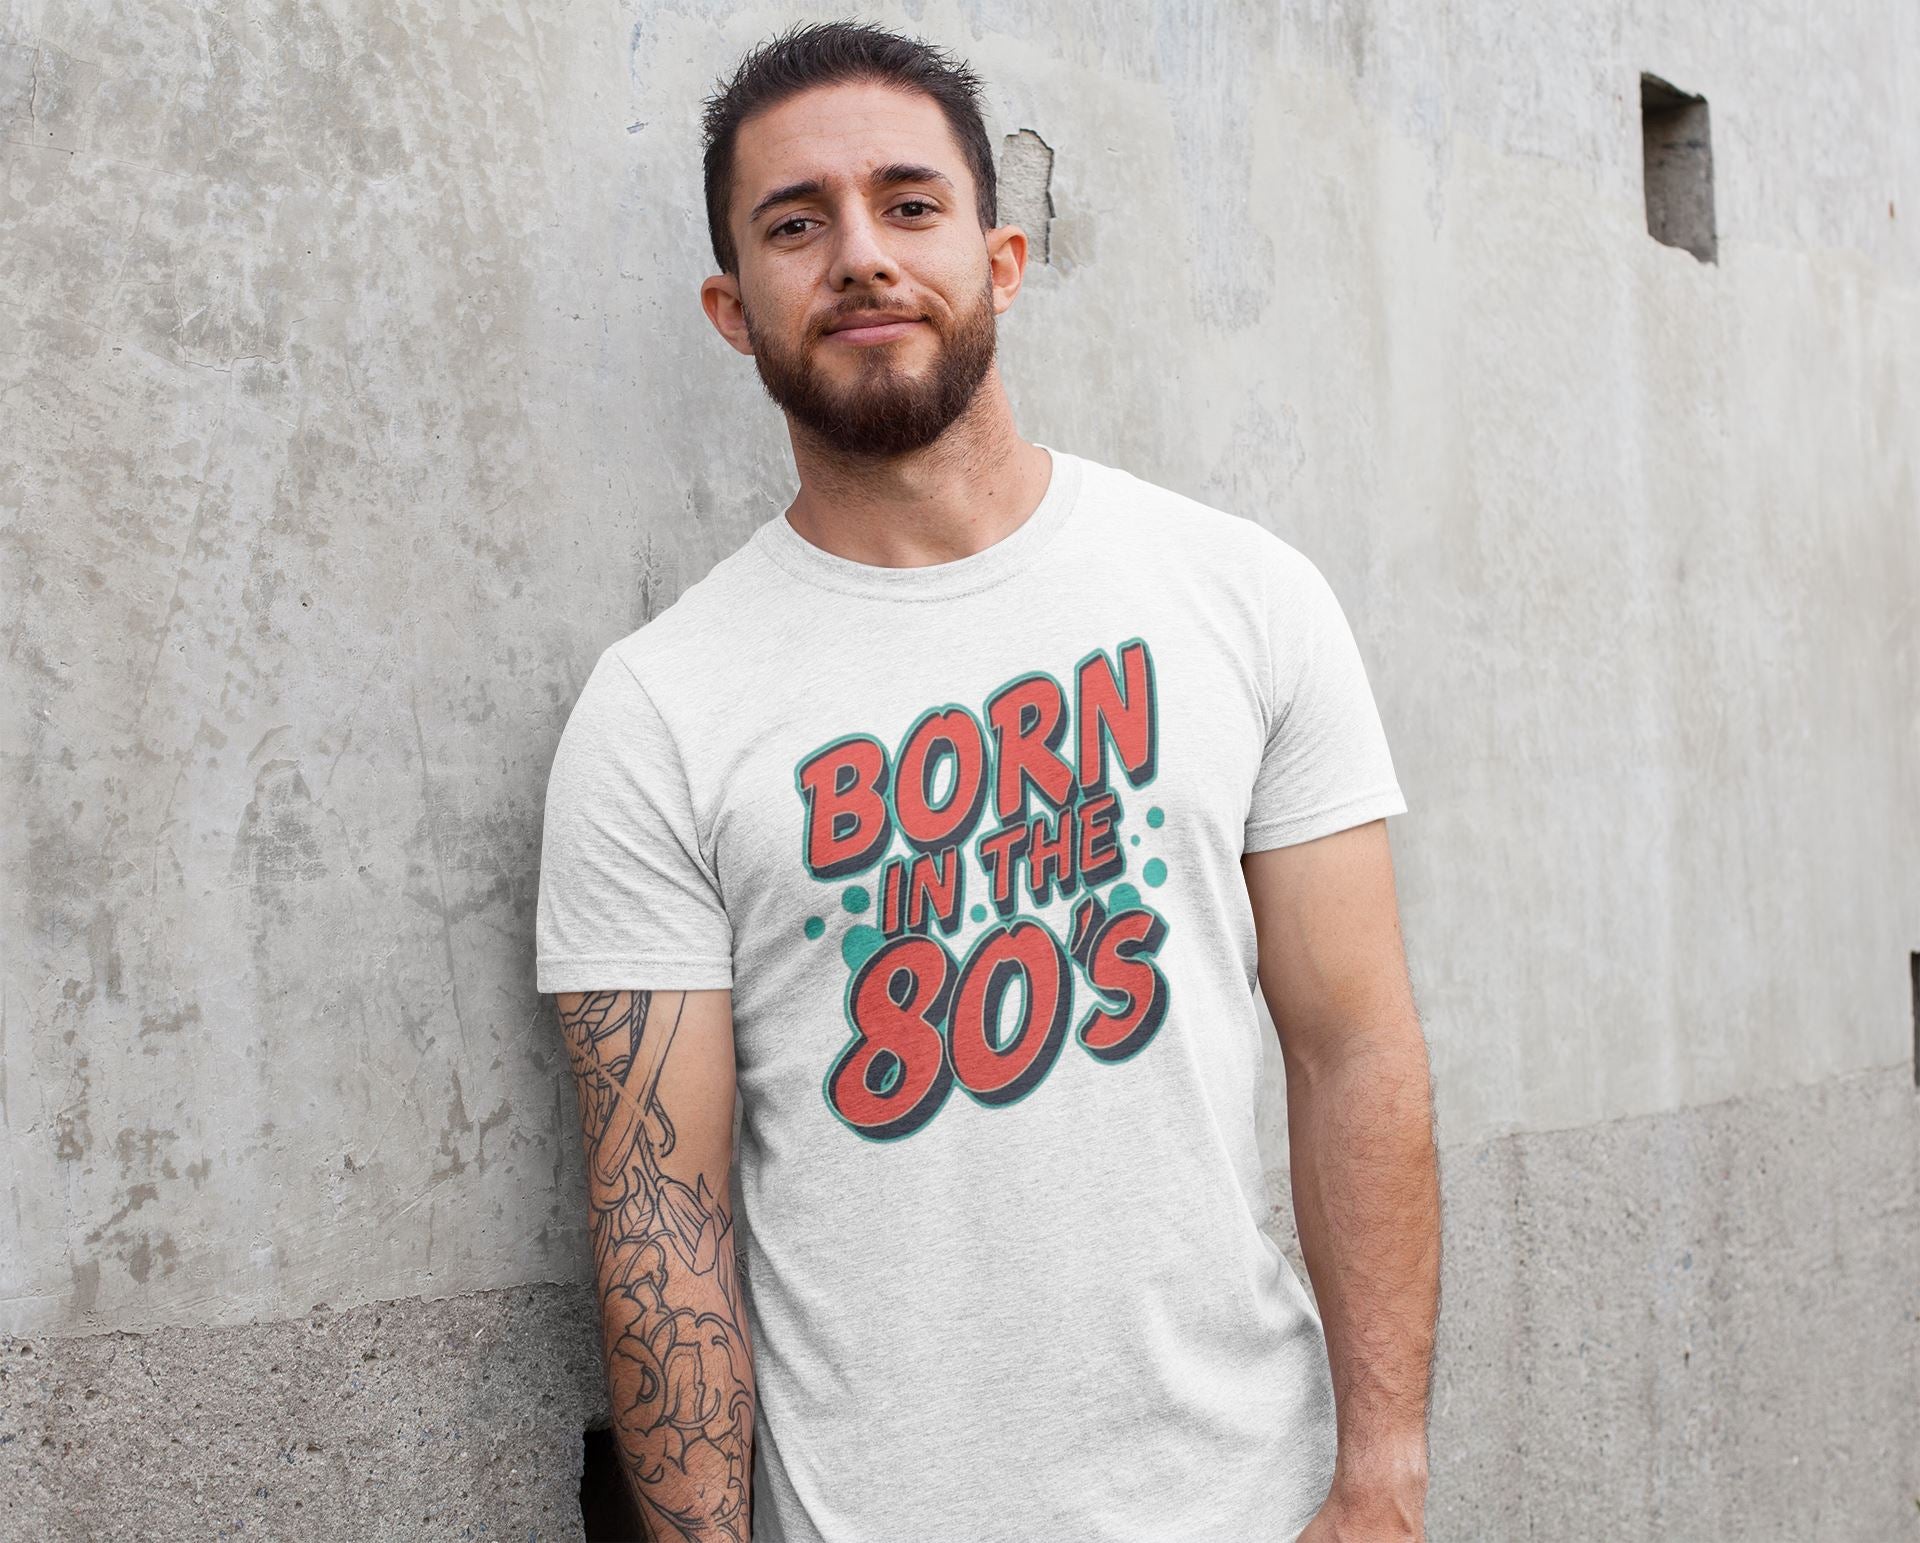 Born in the 80's Exclusive Black T Shirt for Men and Women freeshipping - Catch My Drift India